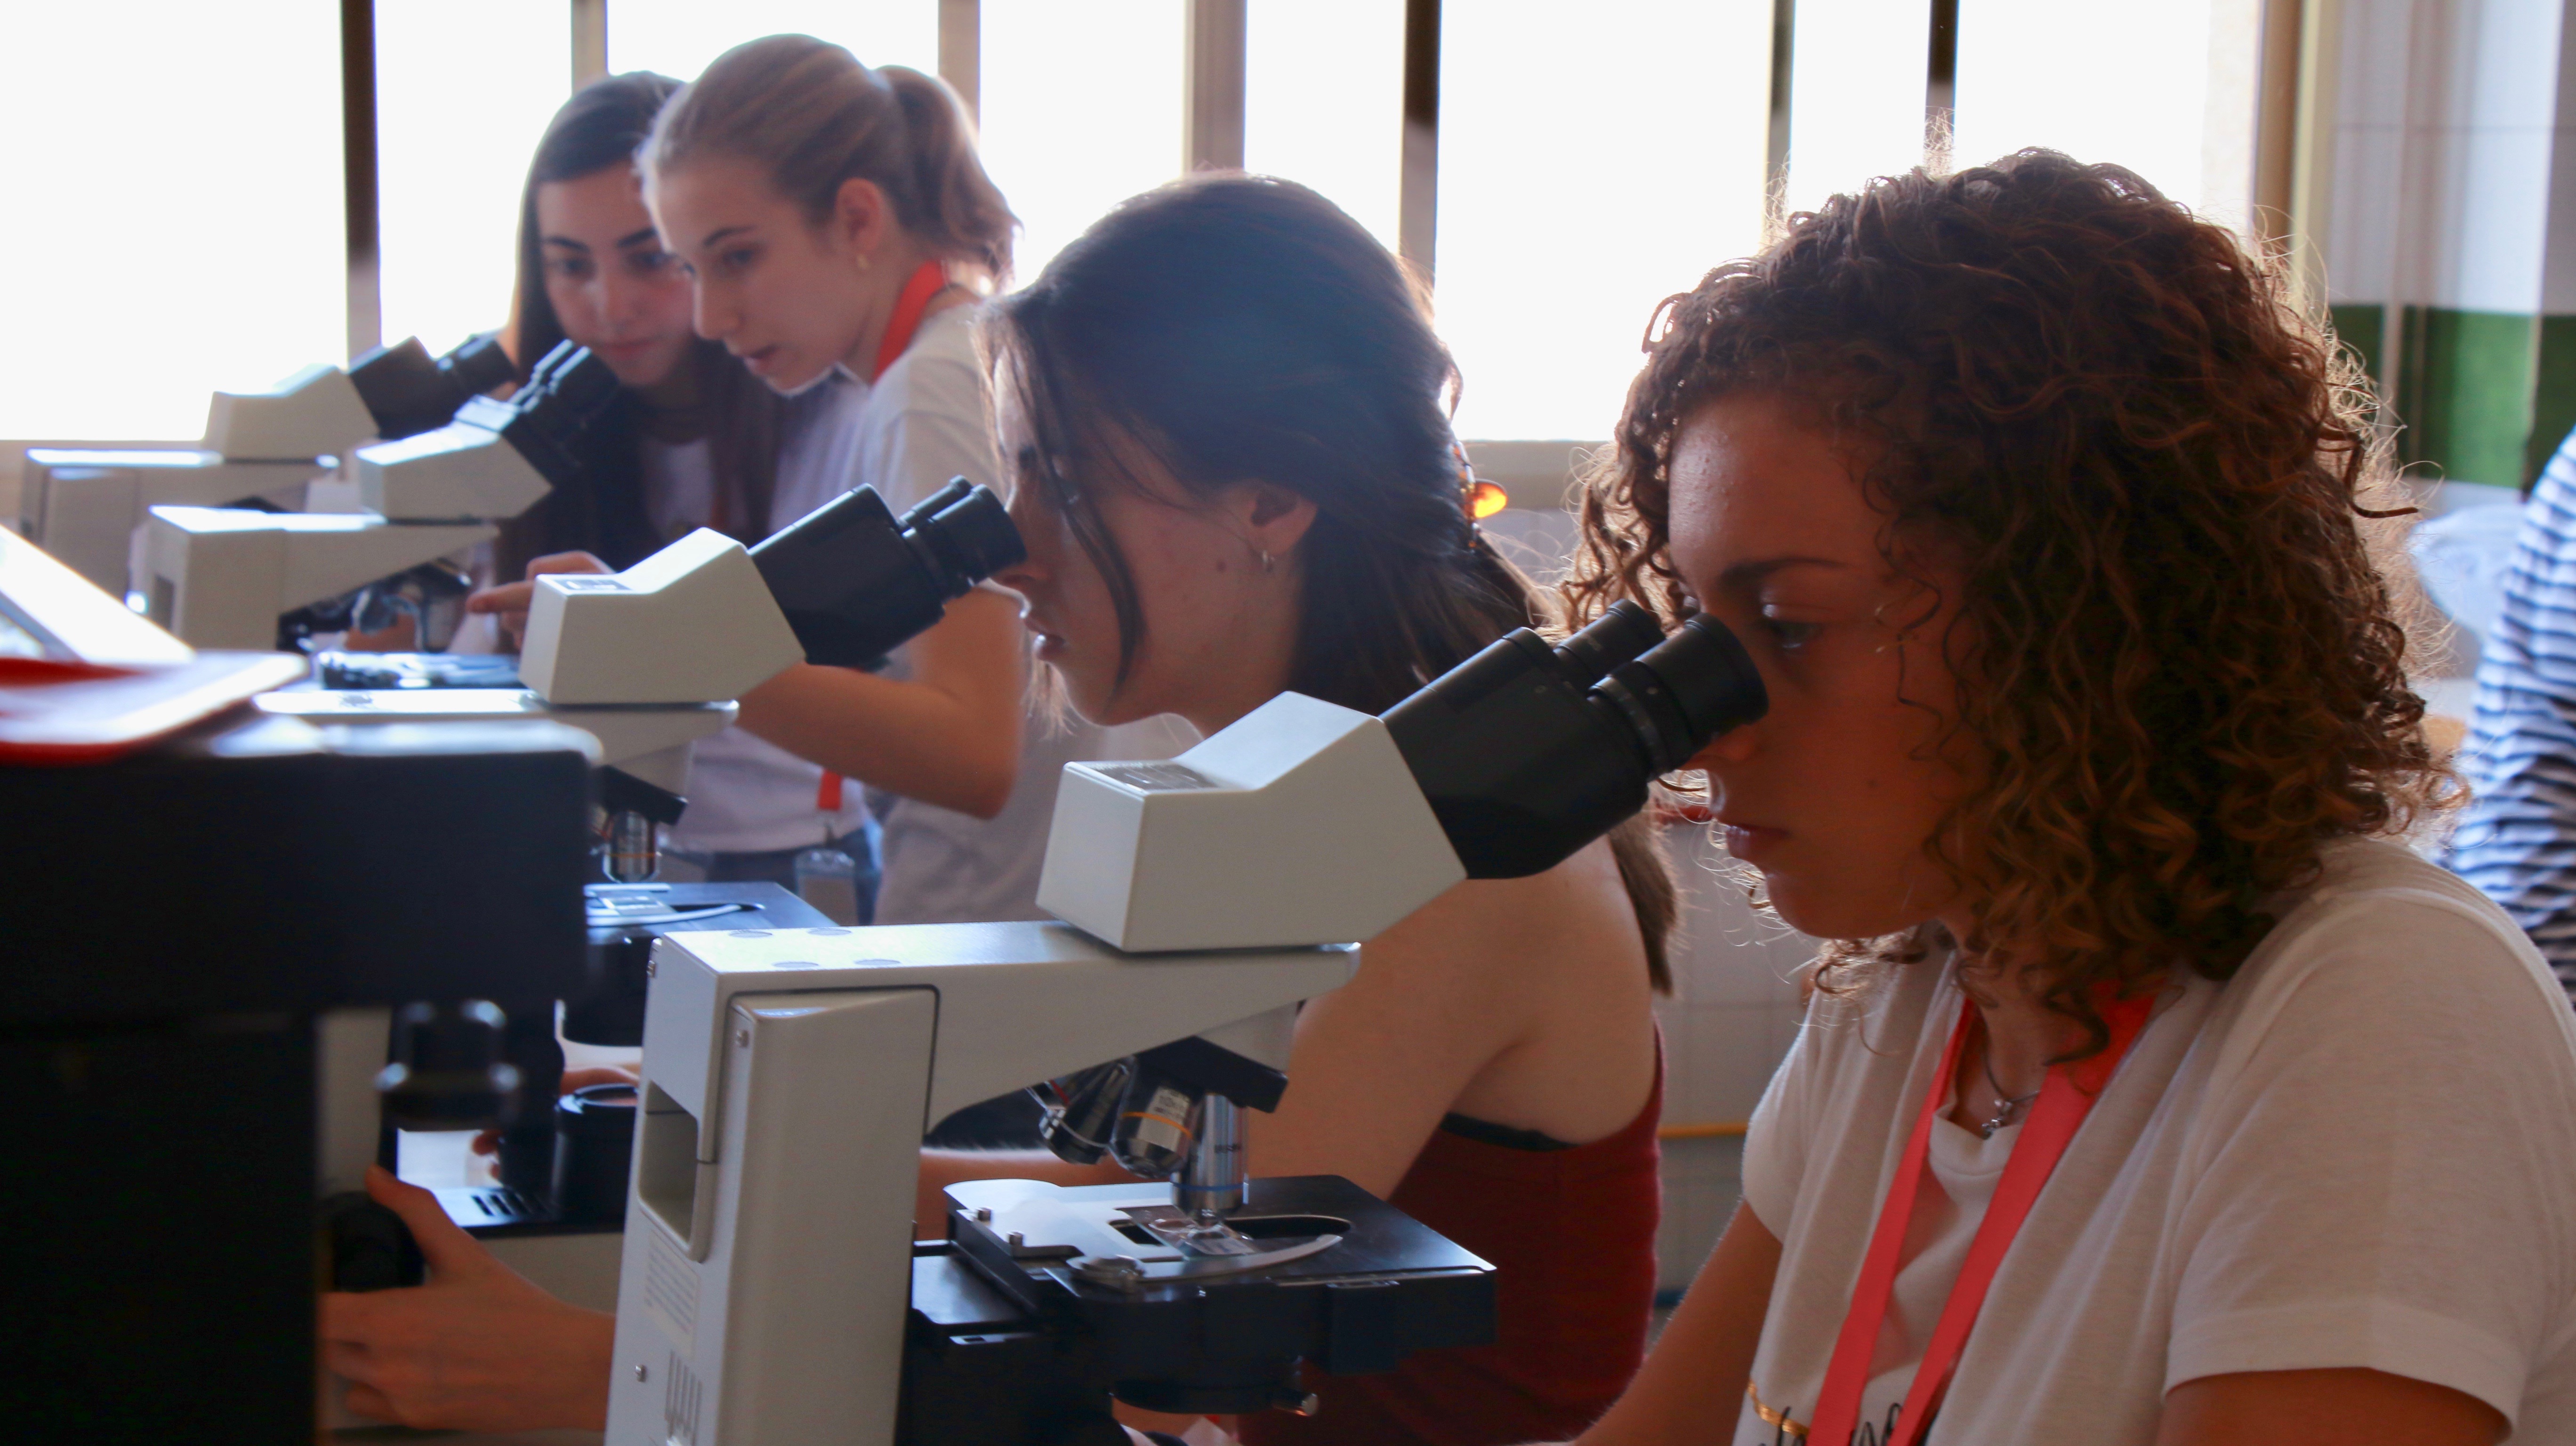 Researchers looking through microscopes